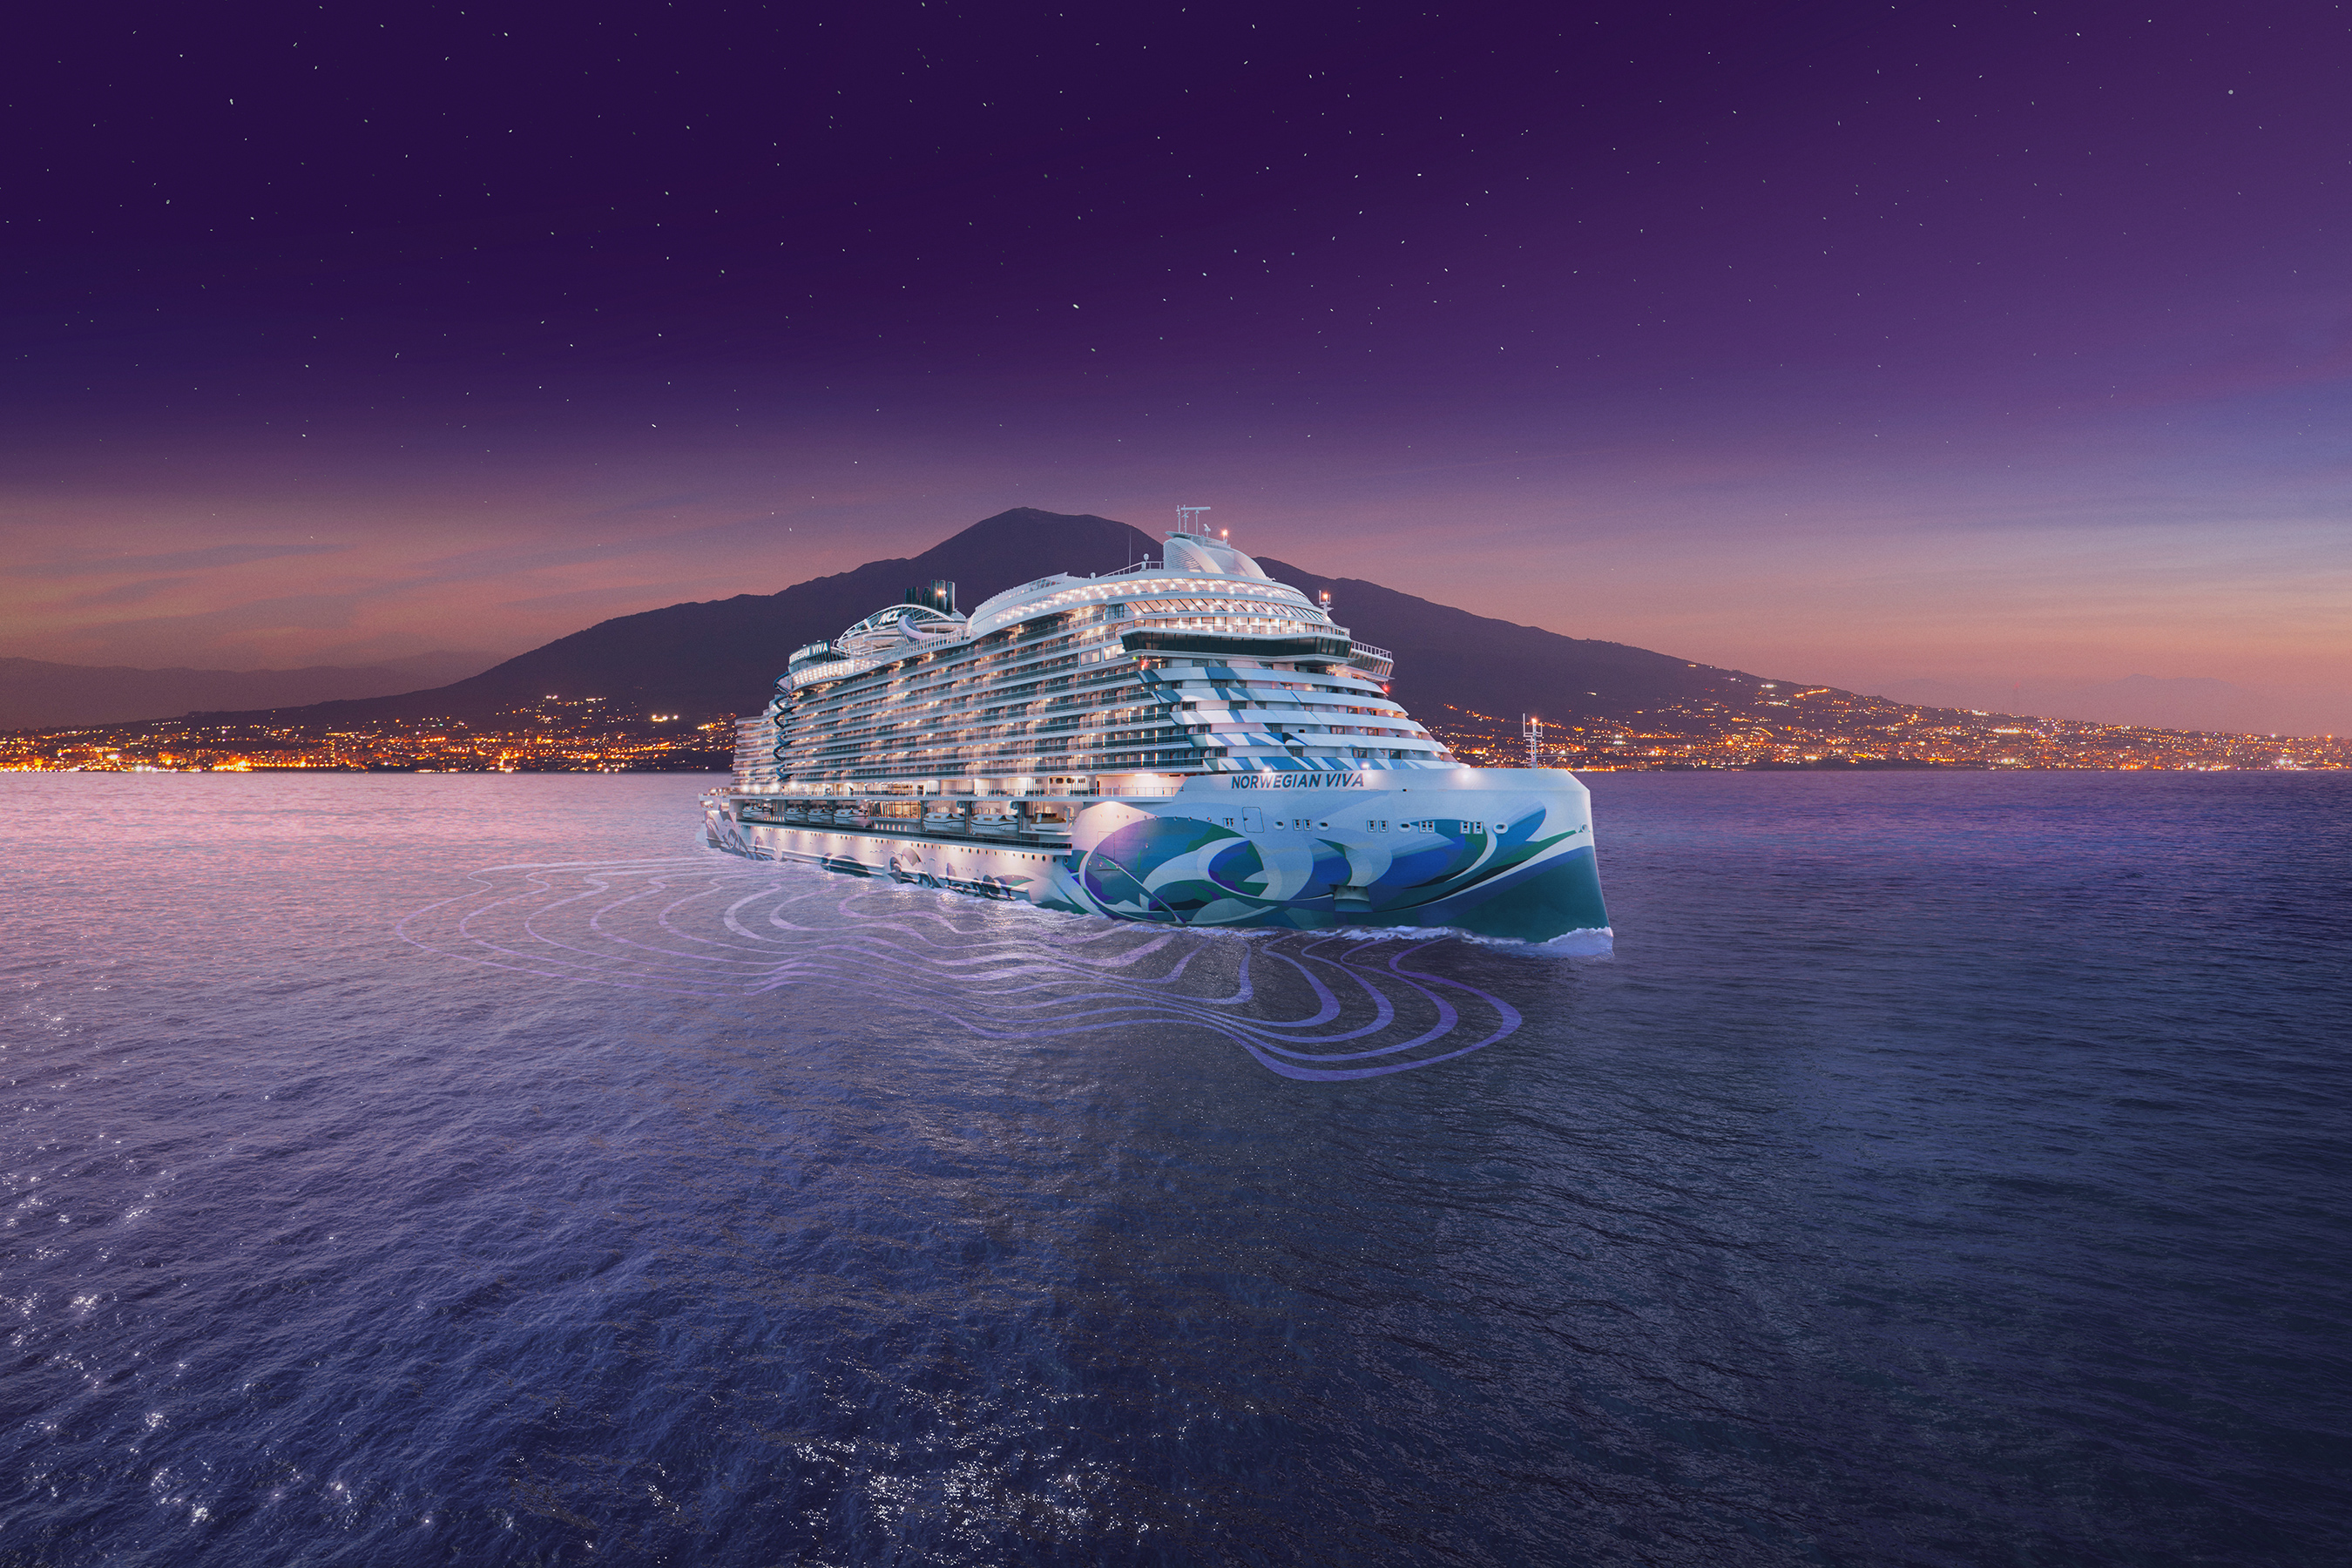 Norwegian Viva, the next stunning ship in the brand-new Prima Class, mirrors the upscale design and structure of her record-breaking sister ship, Norwegian Prima. Norwegian Viva will begin sailing remarkable Mediterranean itineraries in June 2023.